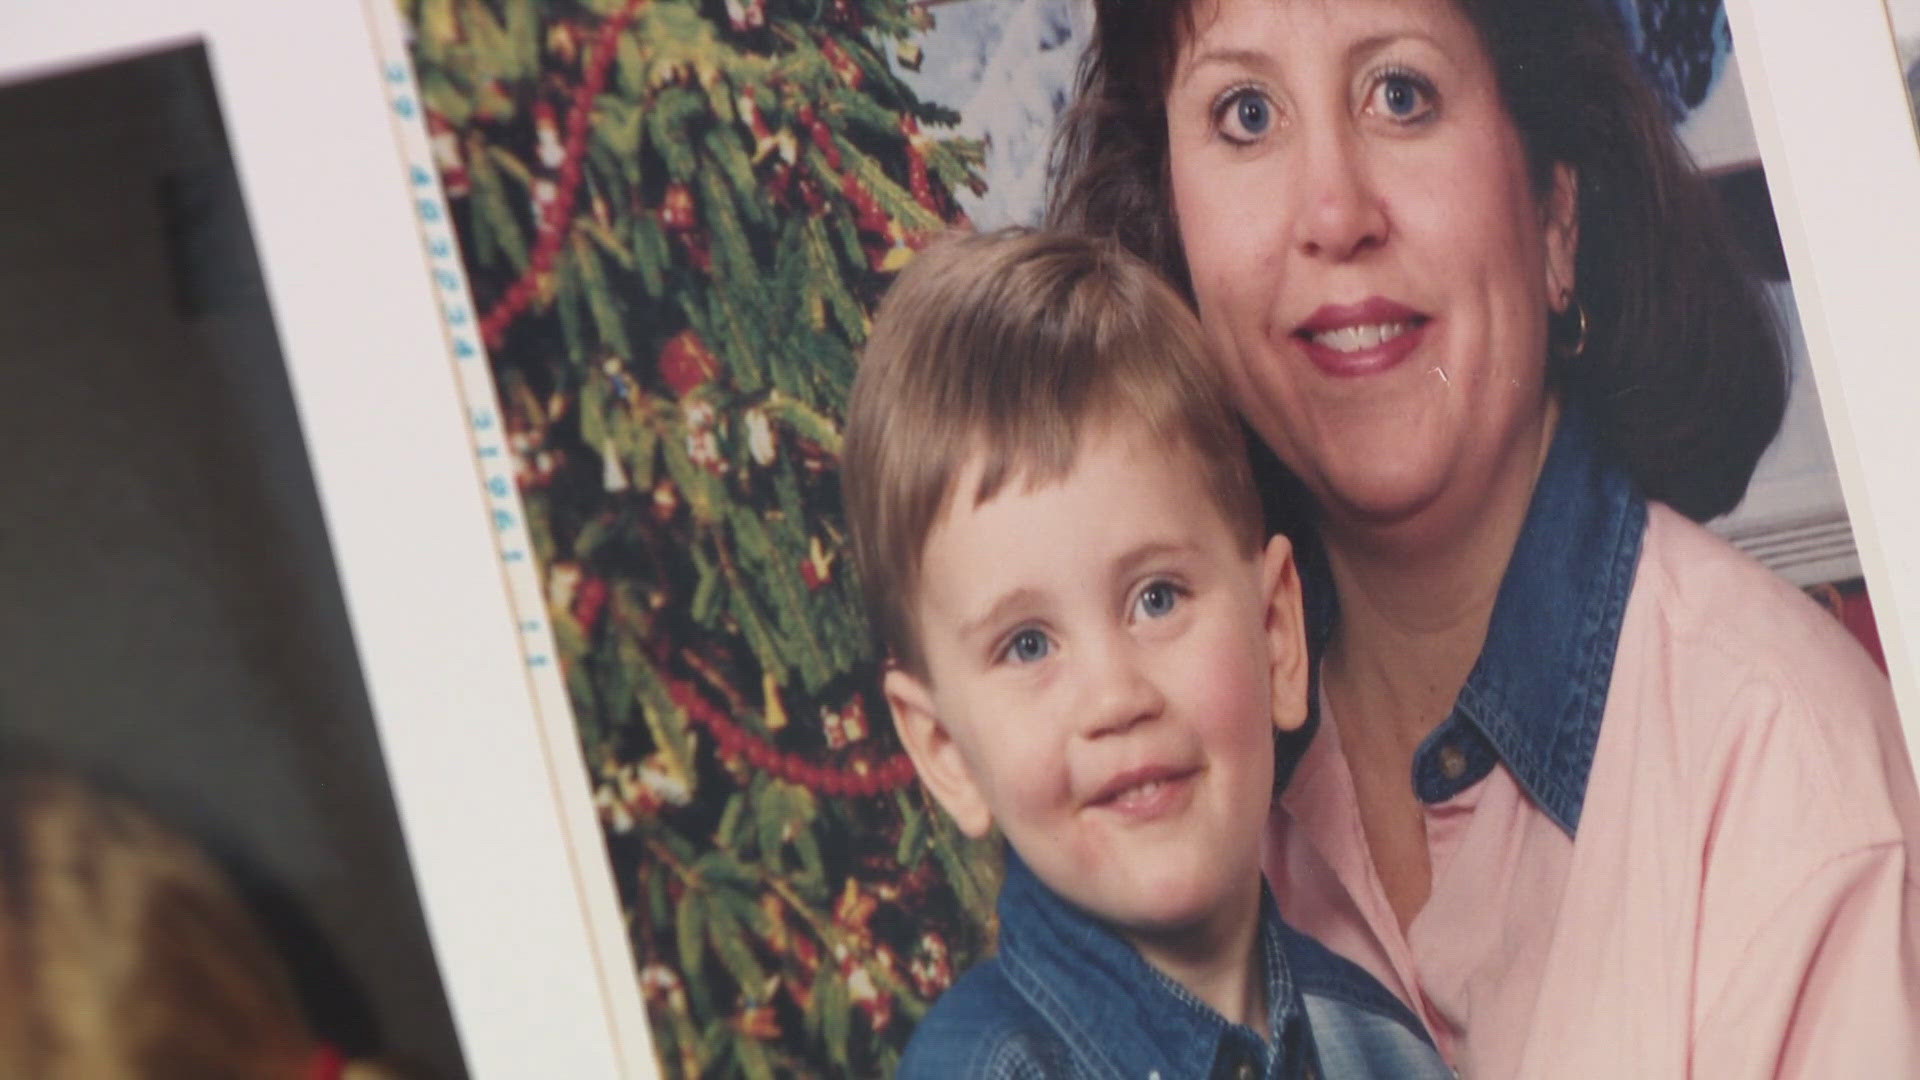 Brock Welch was killed in December 2022 after he told his mother he was going to get dinner. Two years later, the Welch family is finally getting closure.